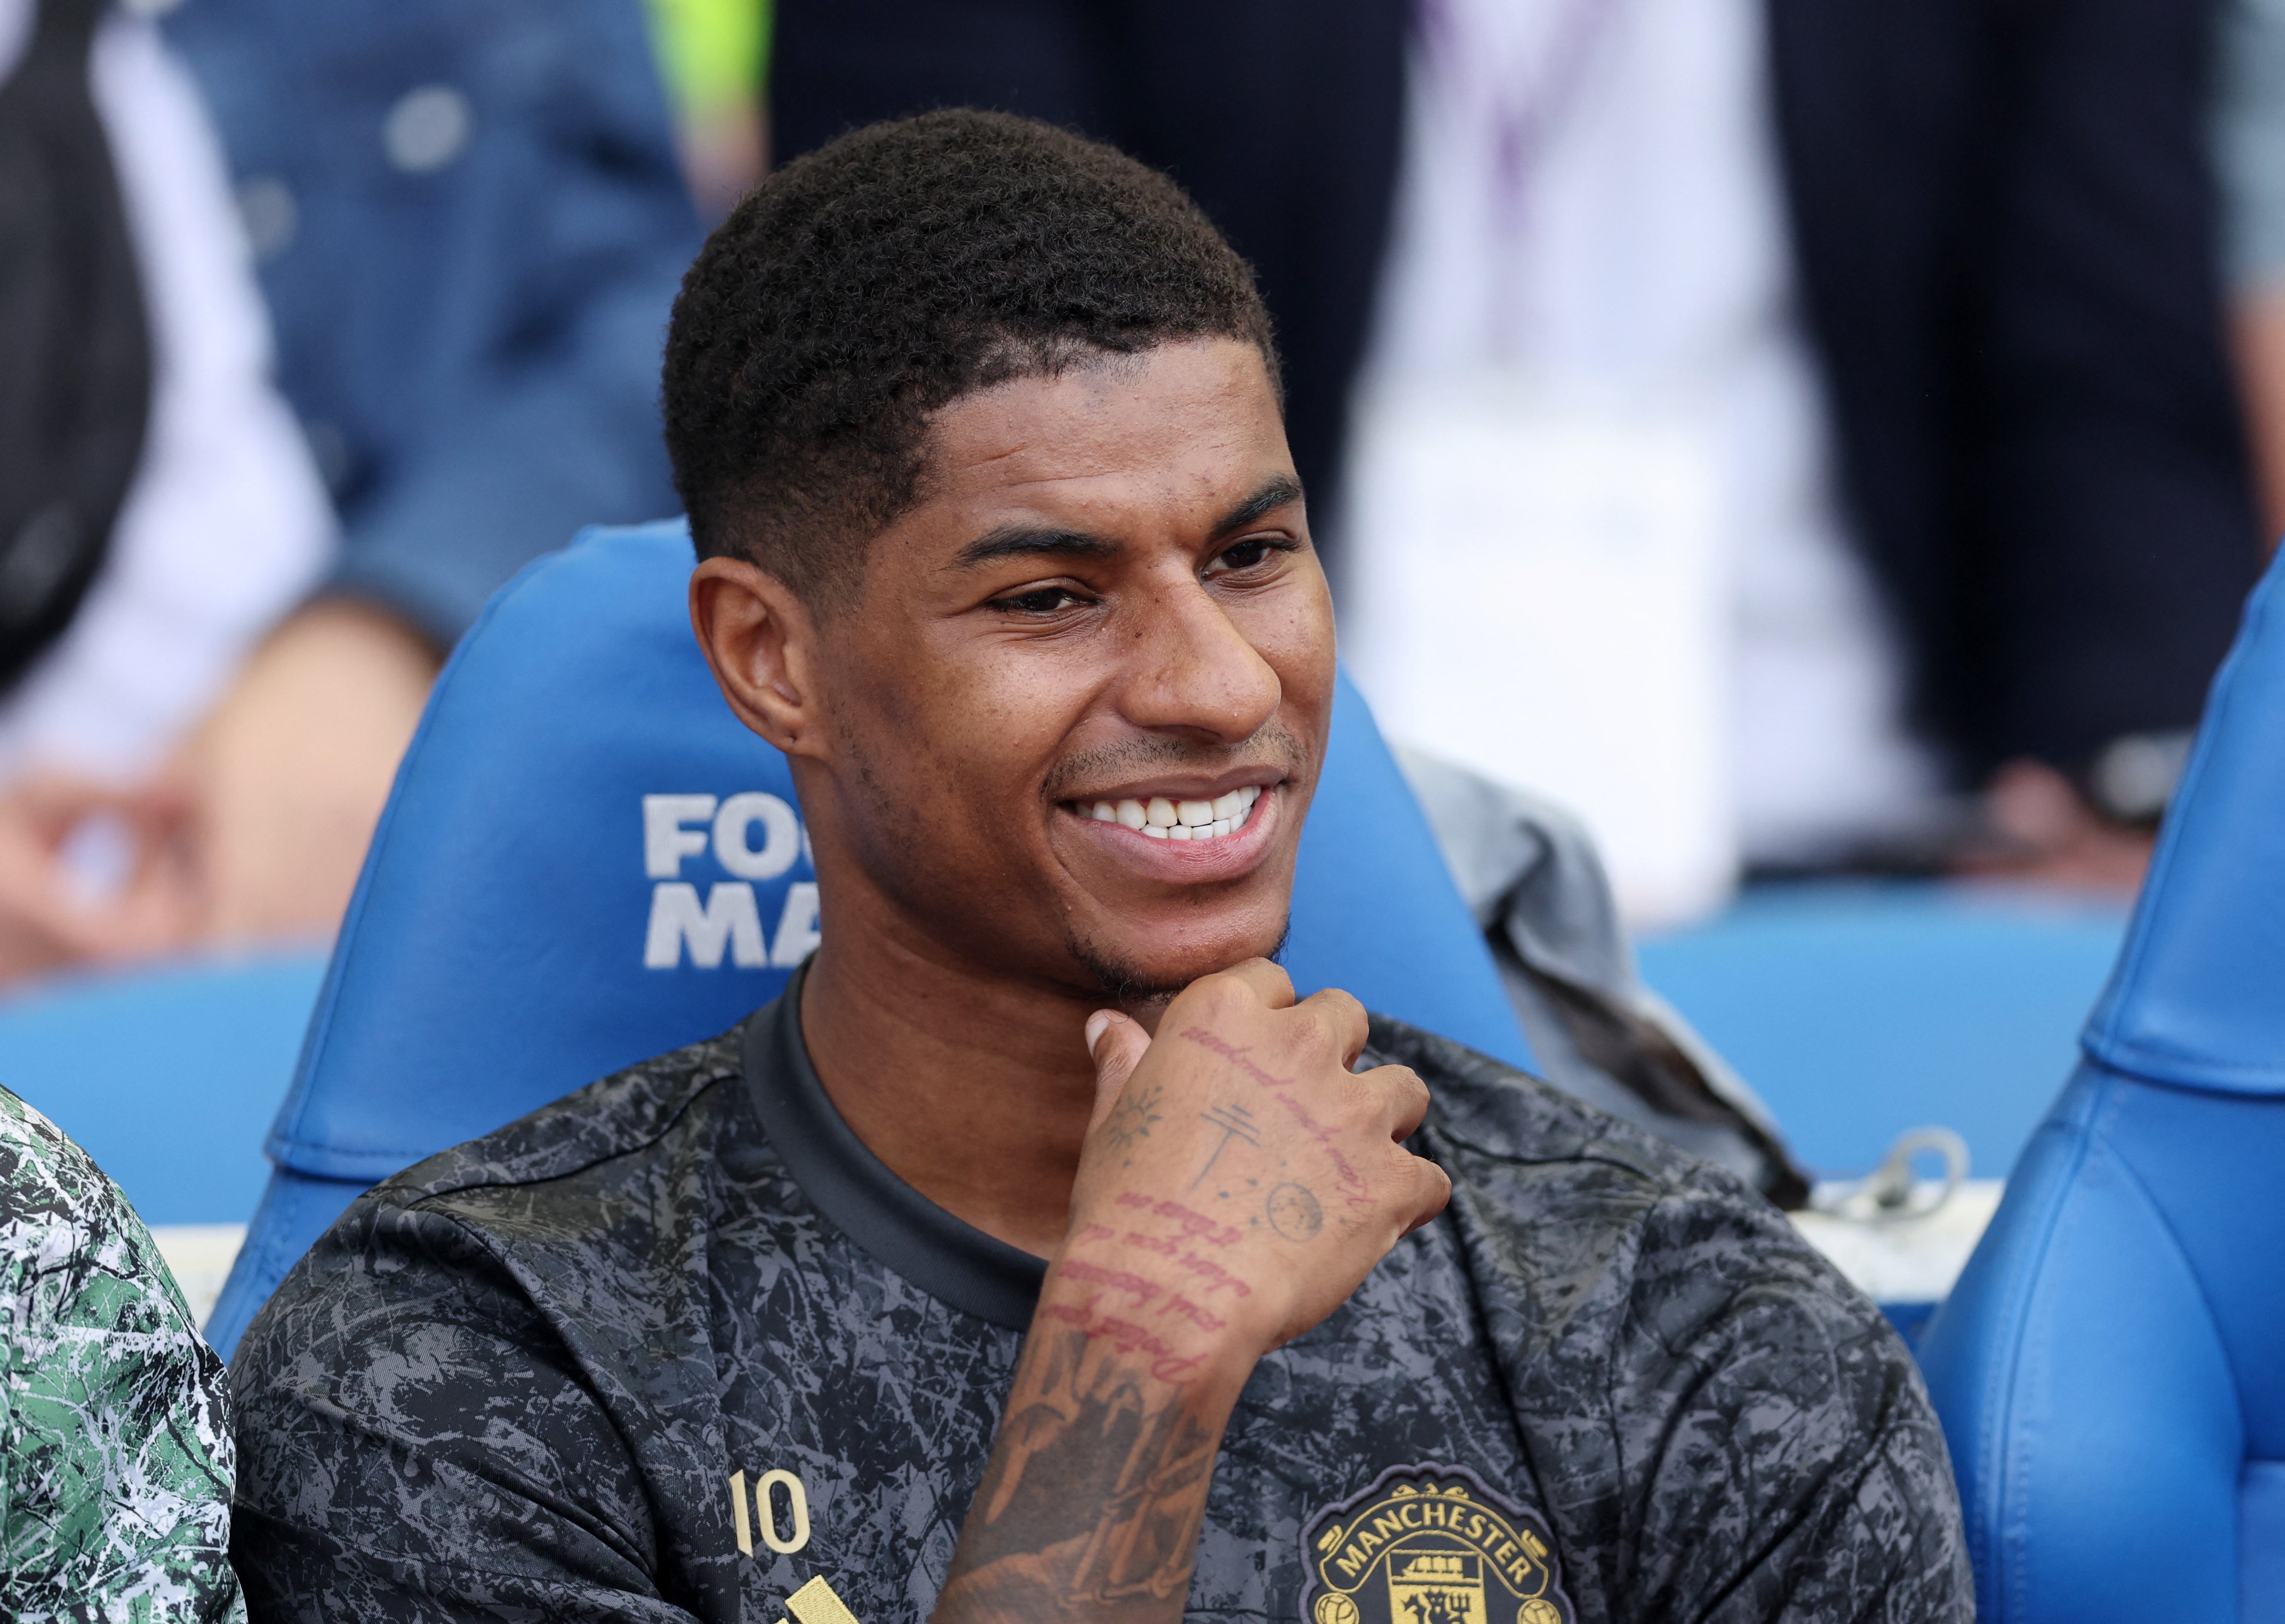 Marcus Rashford has been backed by his manager